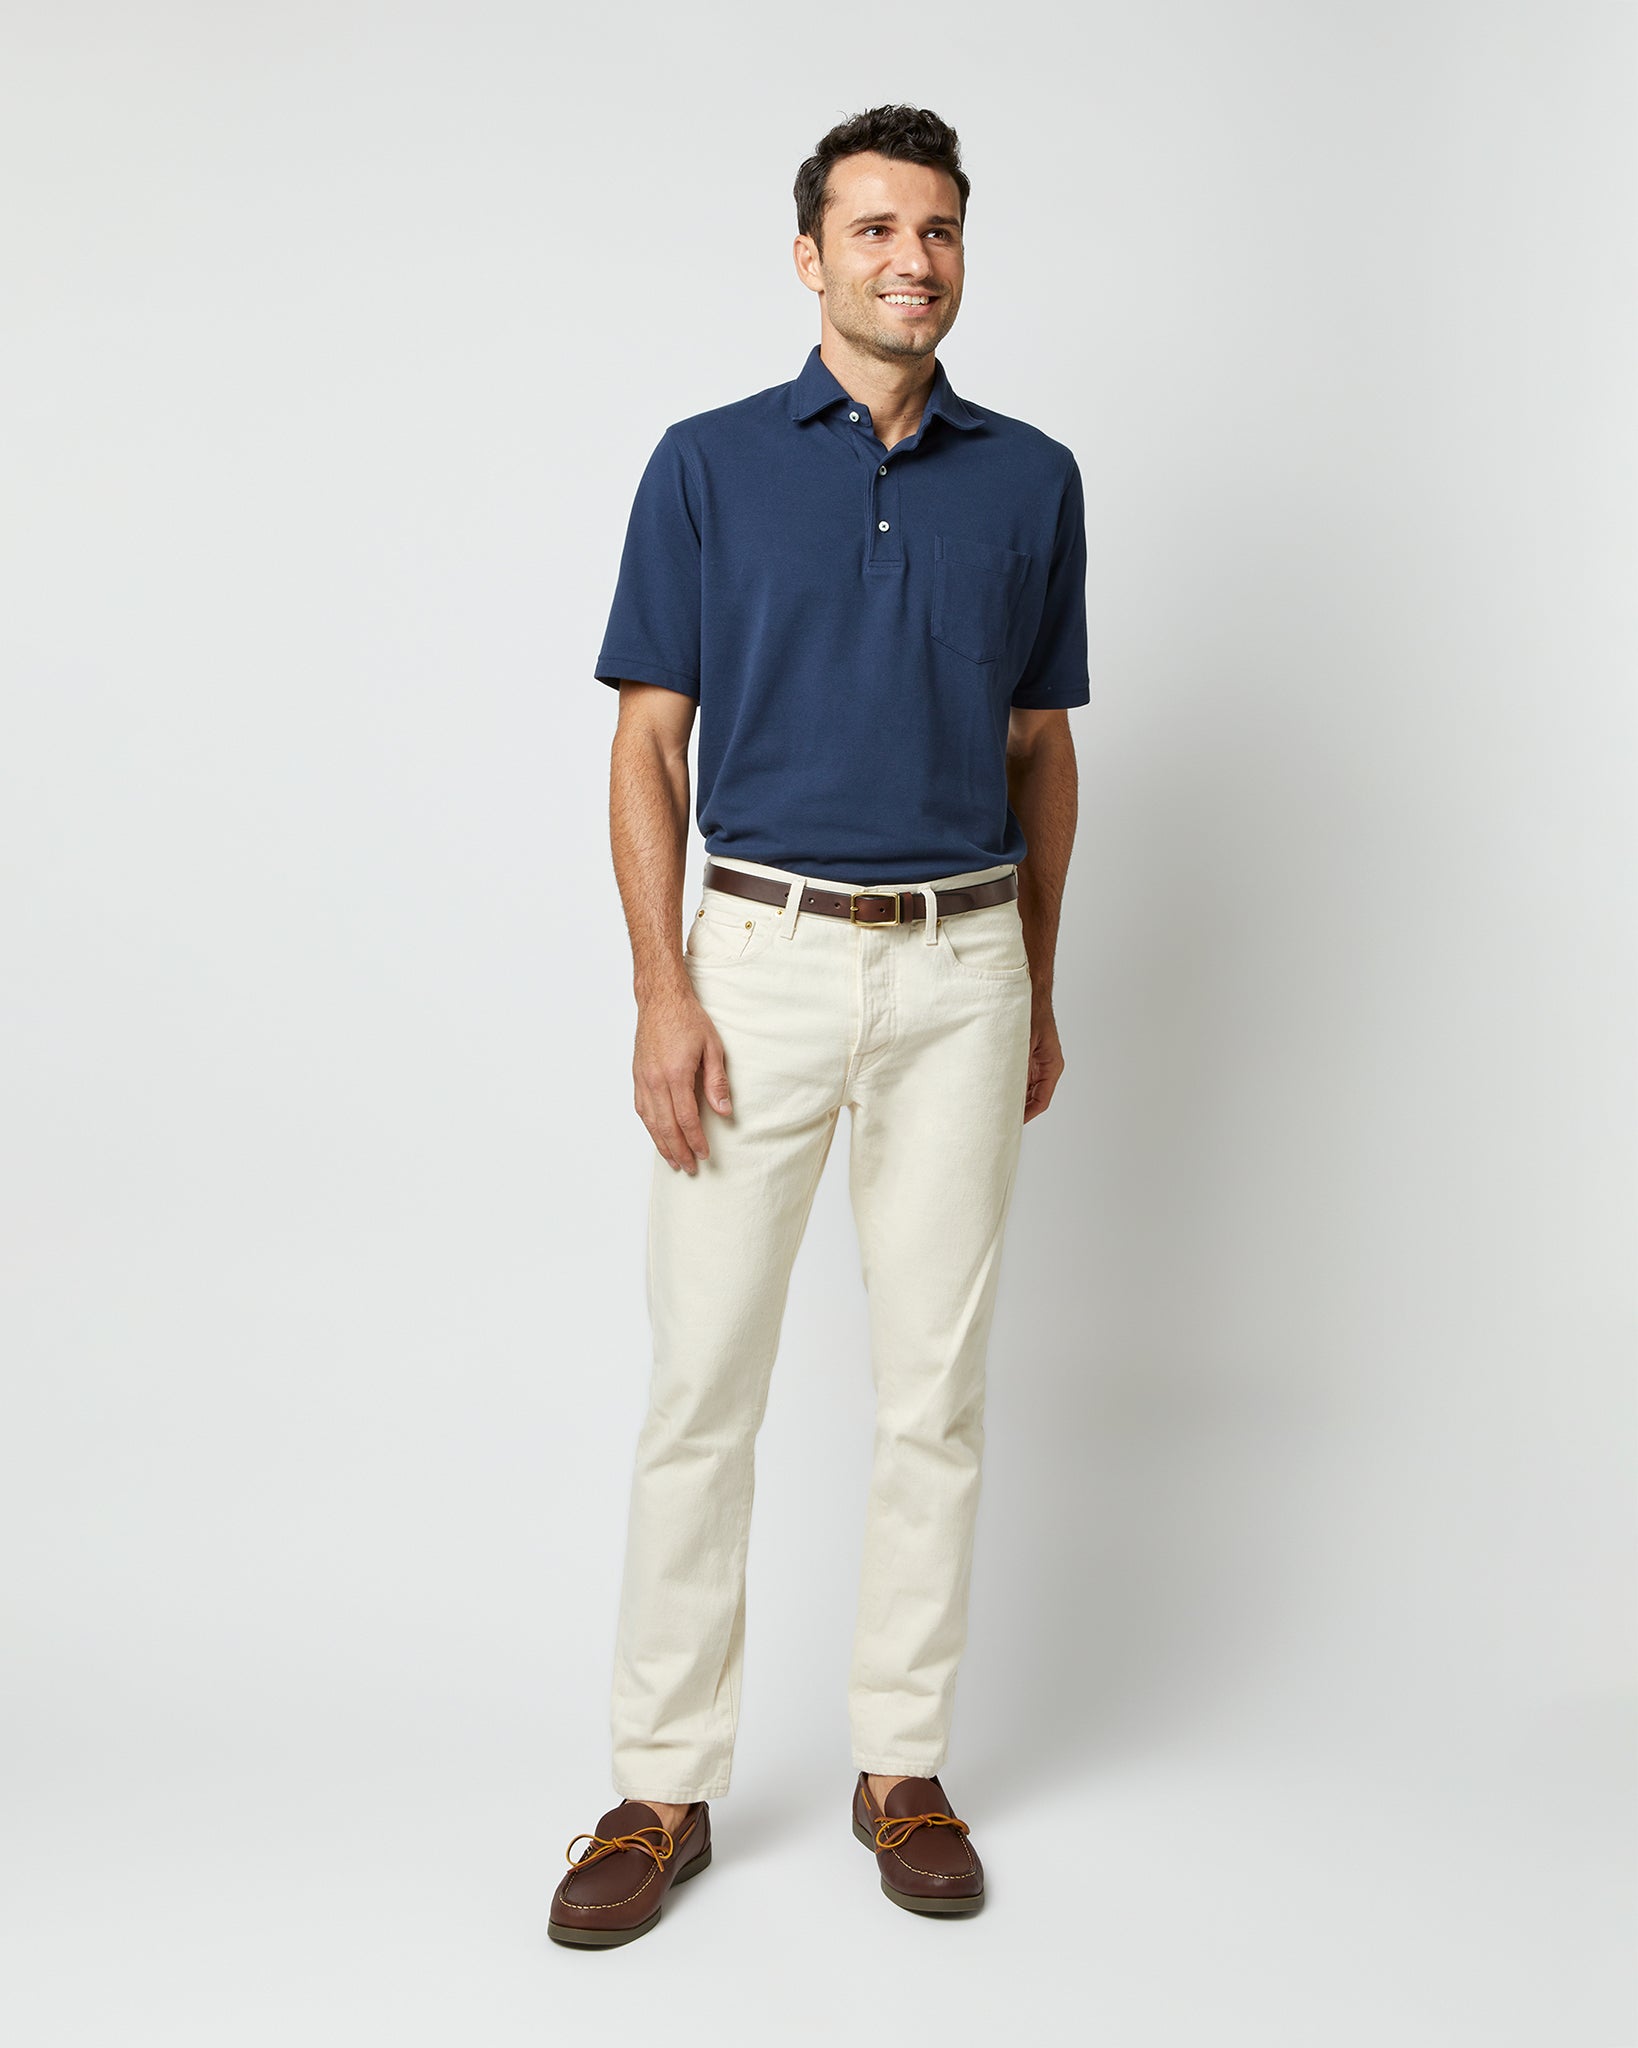 Multipatch Sash Short Sleeve Knit Pique Polo - Classic Navy